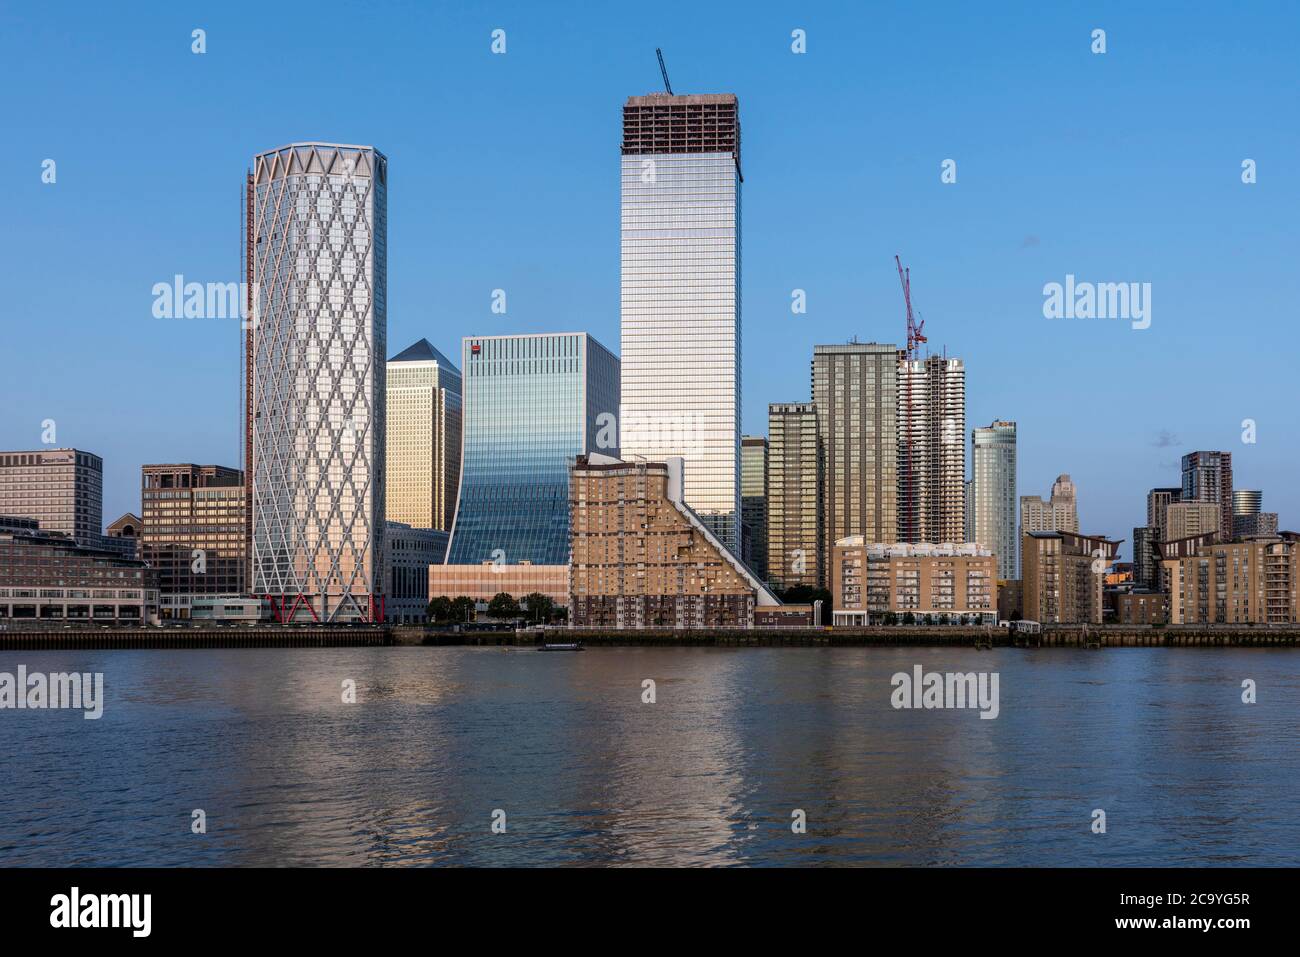 View of the west side of the Isle of Dogs, from left to right: Newfoundland building, Canary Wharf Tower, Societe Generale Landmark Pinnacle, Cascades Stock Photo